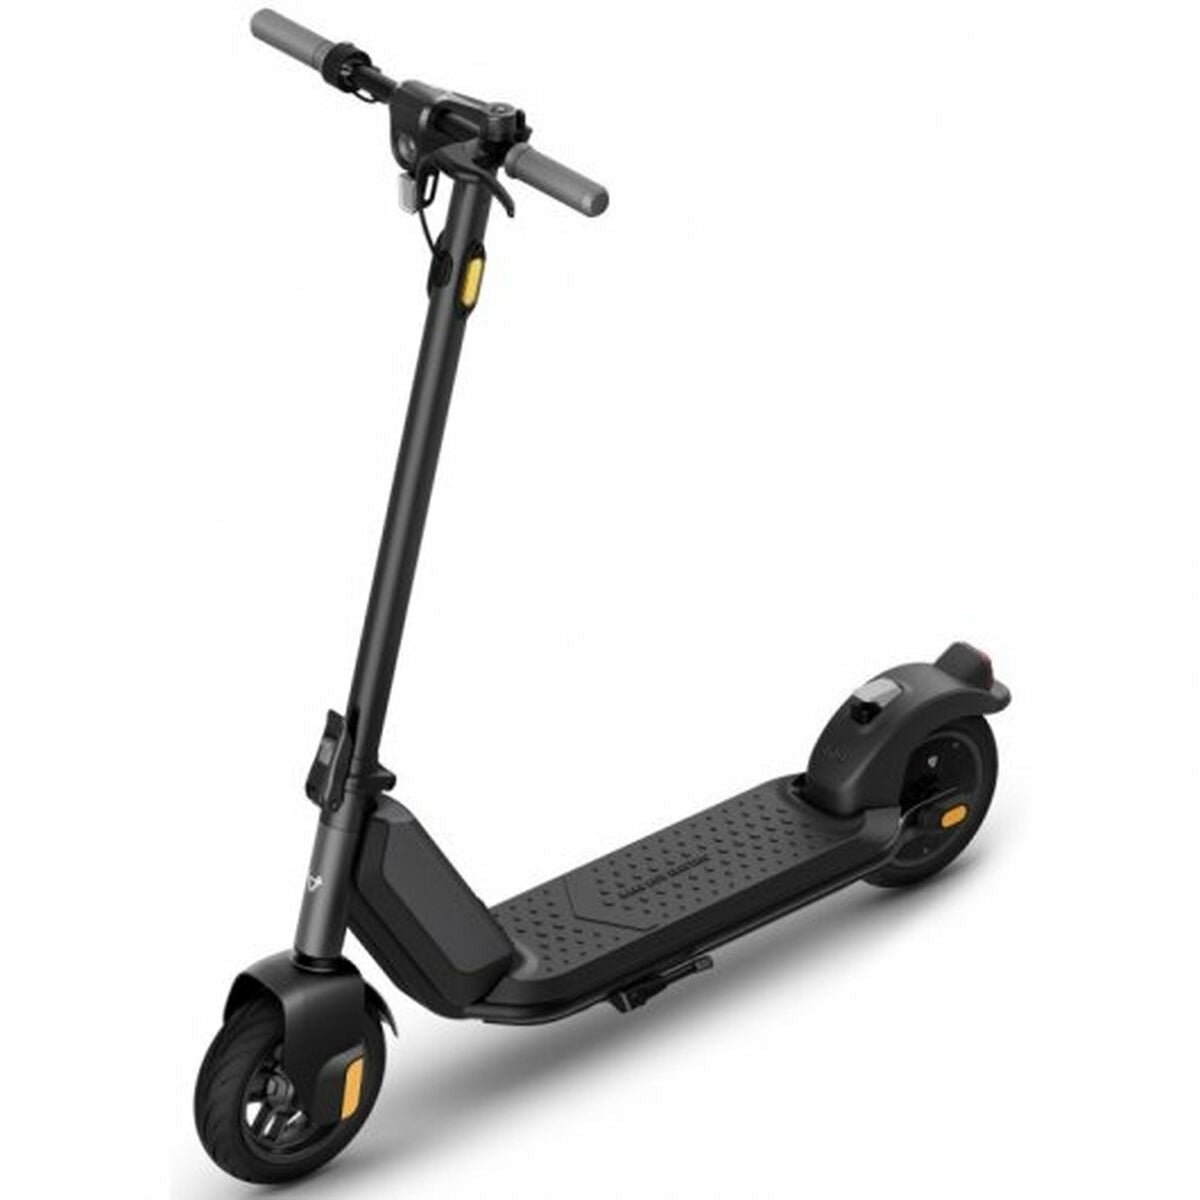 Electric Scooter Niu KQi1 Pro 250 W 9" 25 km/h Grey, Niu, Sports and outdoors, Urban mobility, electric-scooter-niu-kqi1-pro-250-w-9-25-km-h-grey, Brand_Niu, category-reference-2609, category-reference-2629, category-reference-2904, category-reference-t-19681, category-reference-t-19756, category-reference-t-19876, category-reference-t-21245, category-reference-t-25387, Condition_NEW, deportista / en forma, Price_500 - 600, RiotNook